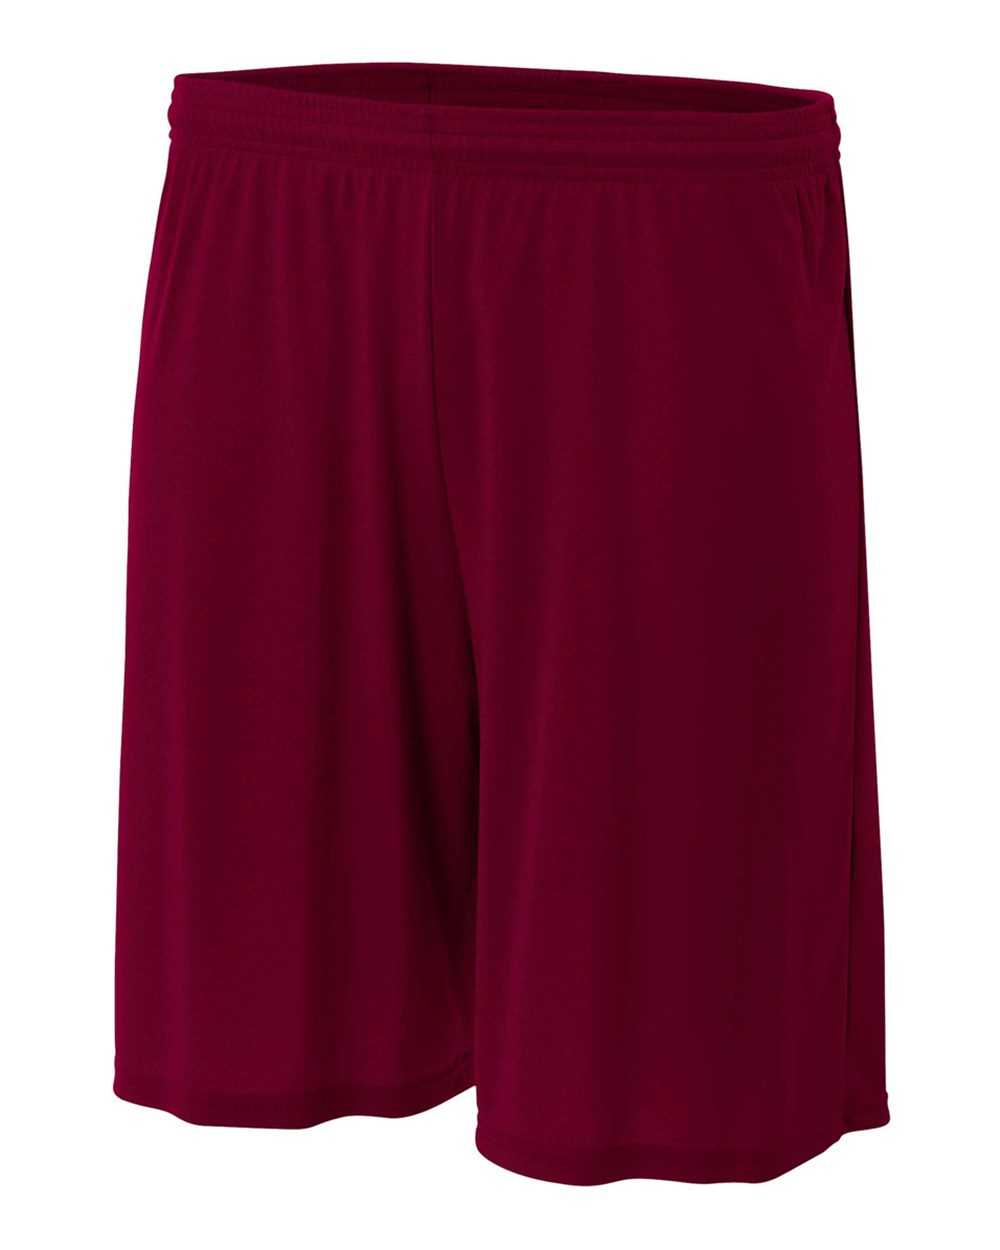 A4 N5244 7" Cooling Performance Short - Maroon - HIT a Double